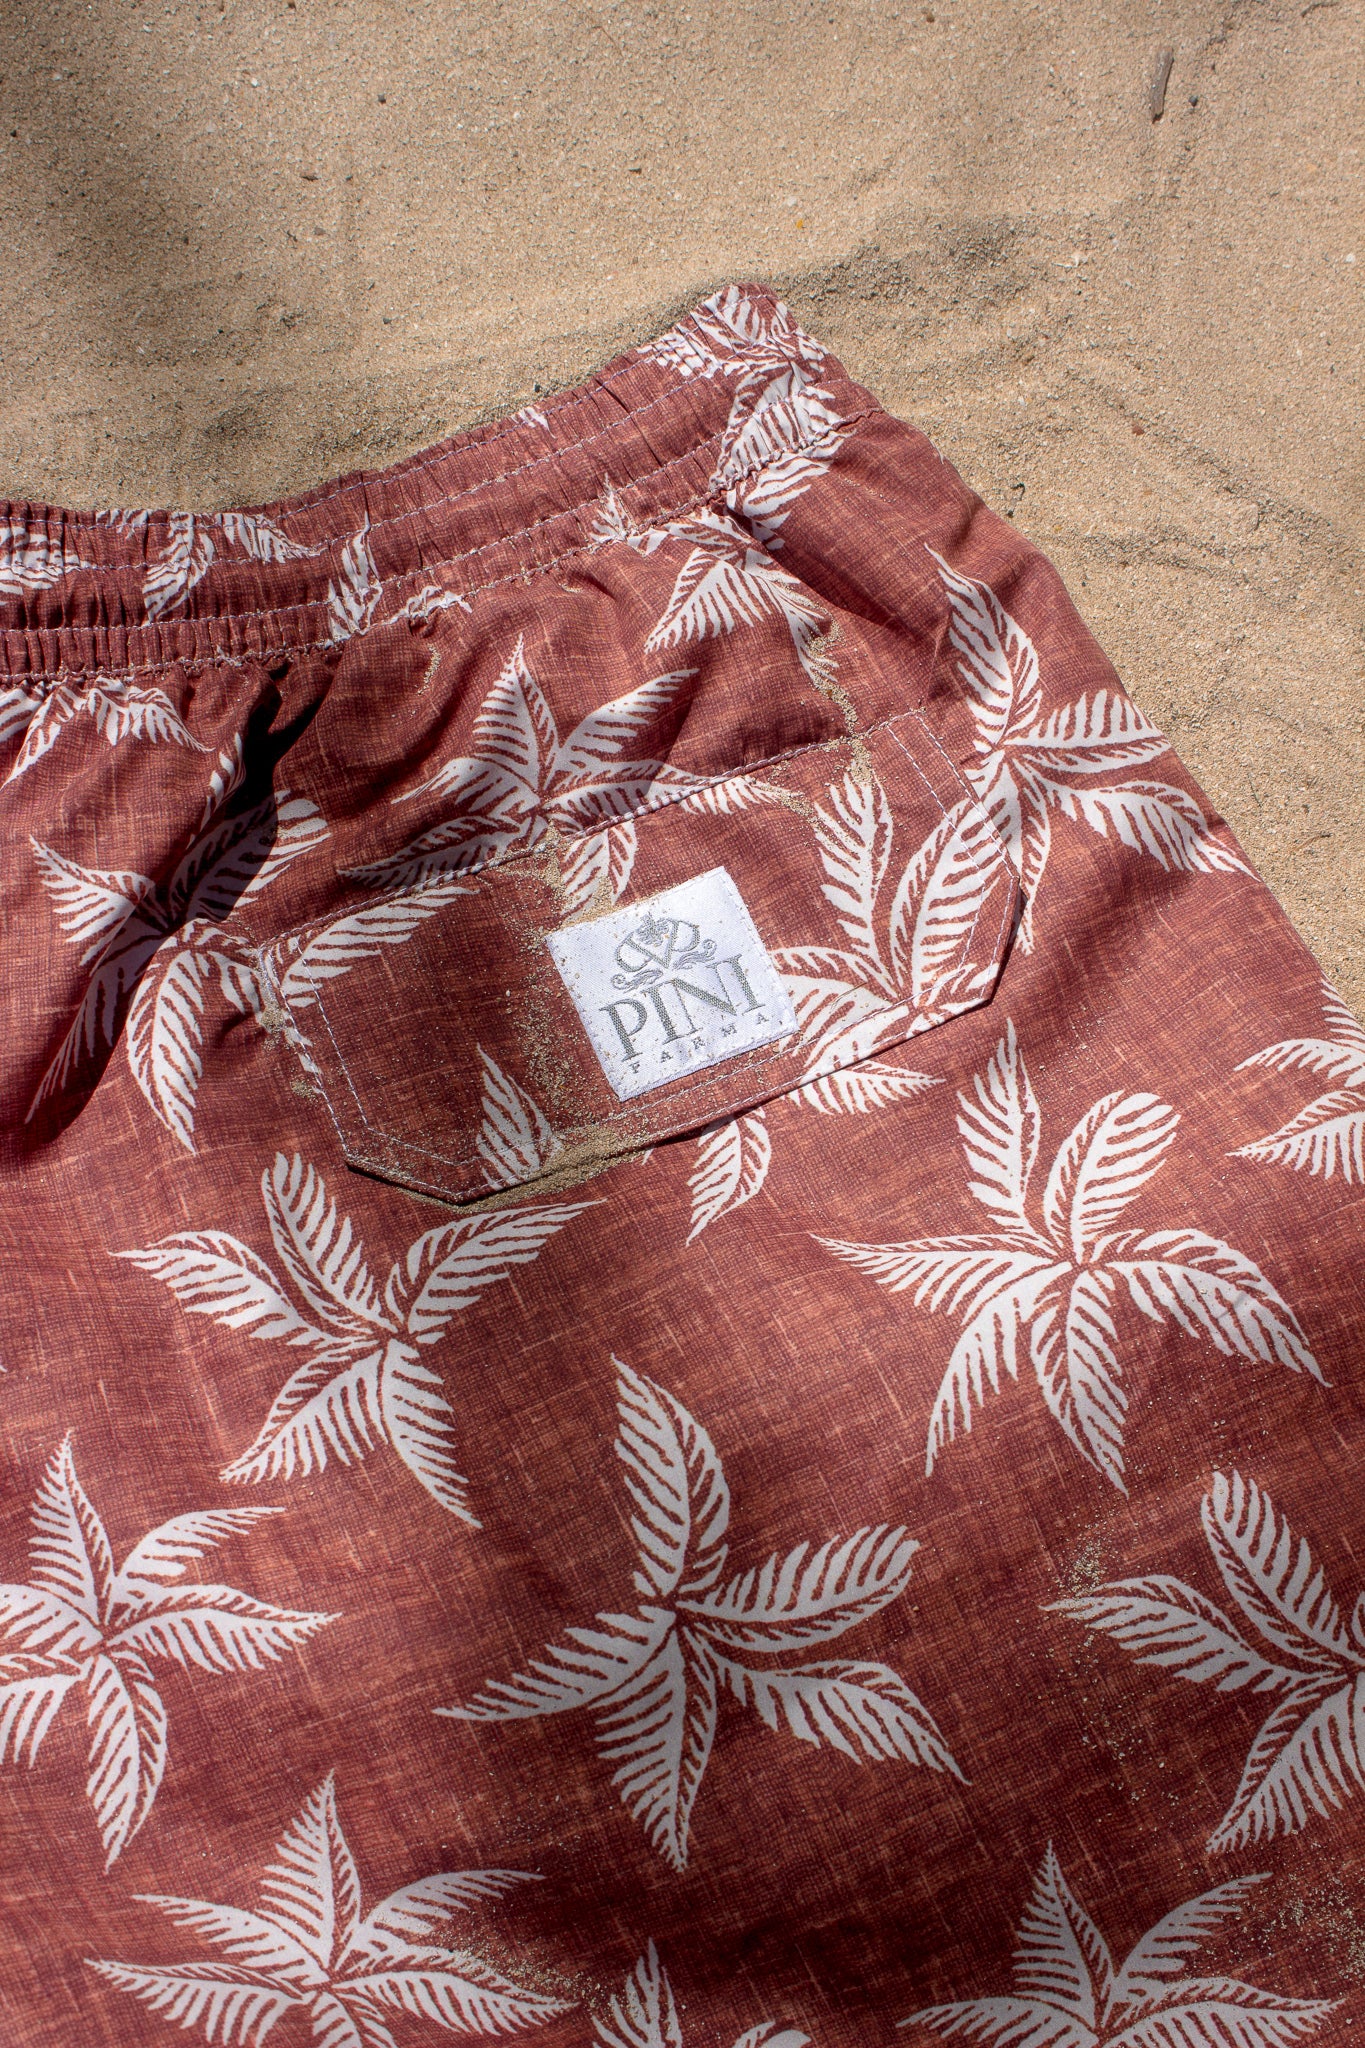 Striped linen shorts - Made in Italy